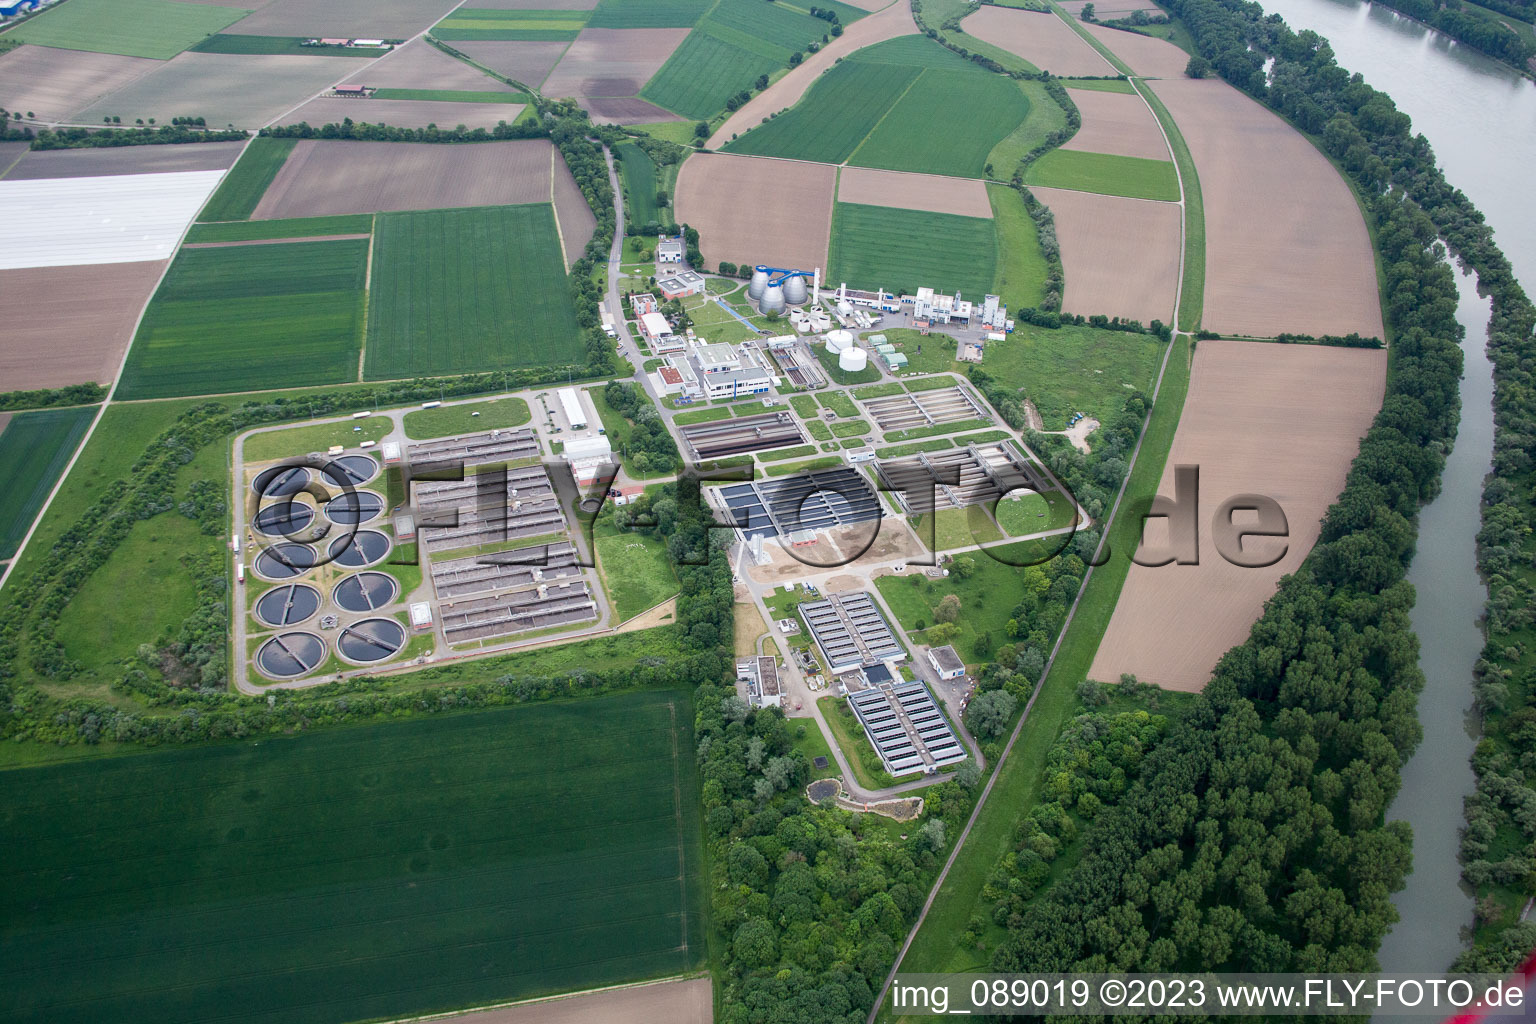 Aerial view of Urban drainage sewage treatment plant in the district Sandhofen in Mannheim in the state Baden-Wuerttemberg, Germany